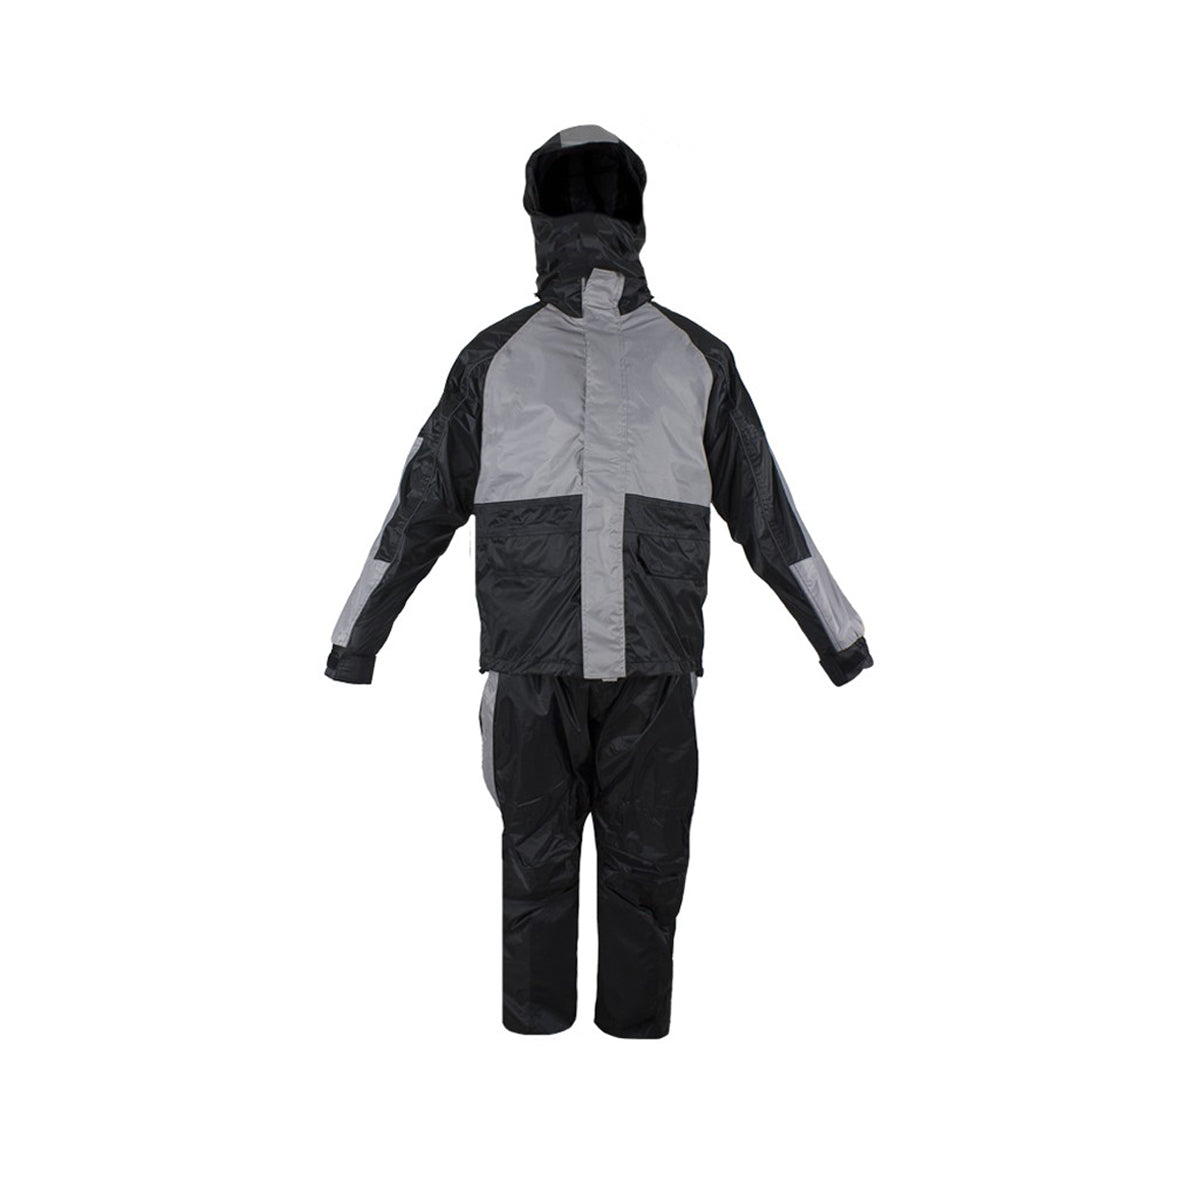 Two-Piece Black & Gray Rain Suit With Zippered Side Seams